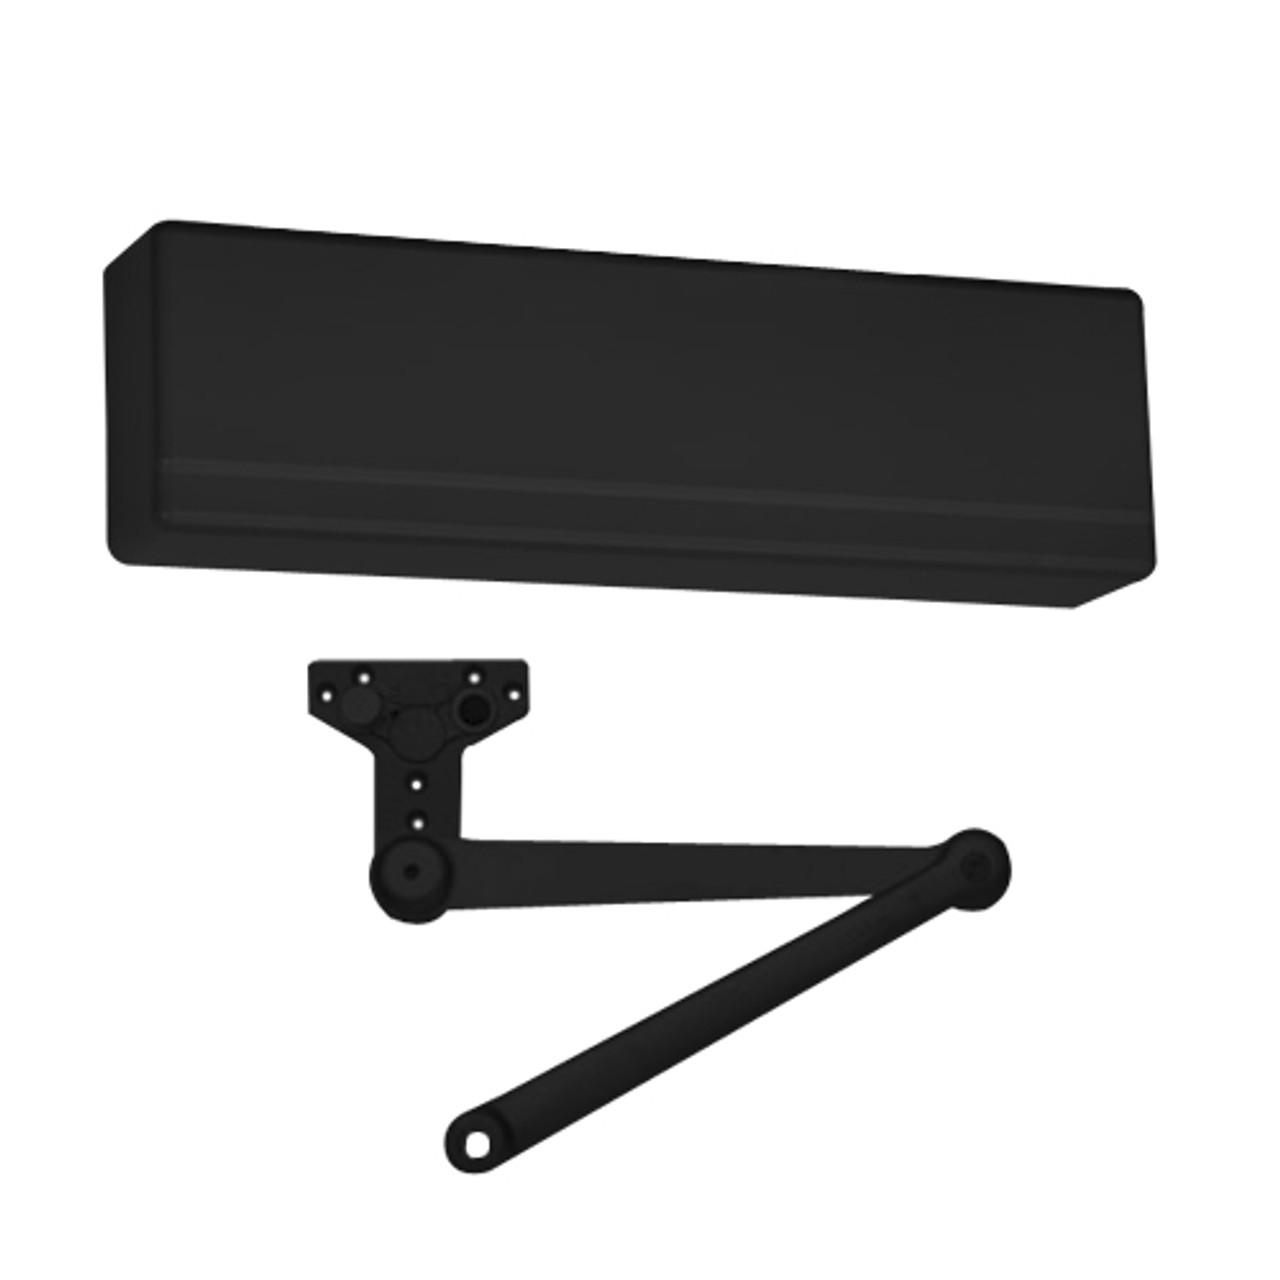 351-PS-ED Sargent 351 Series Powerglide Door Closer with Heavy Duty Parallel Arm with Positive Stop in Black Powder Coat